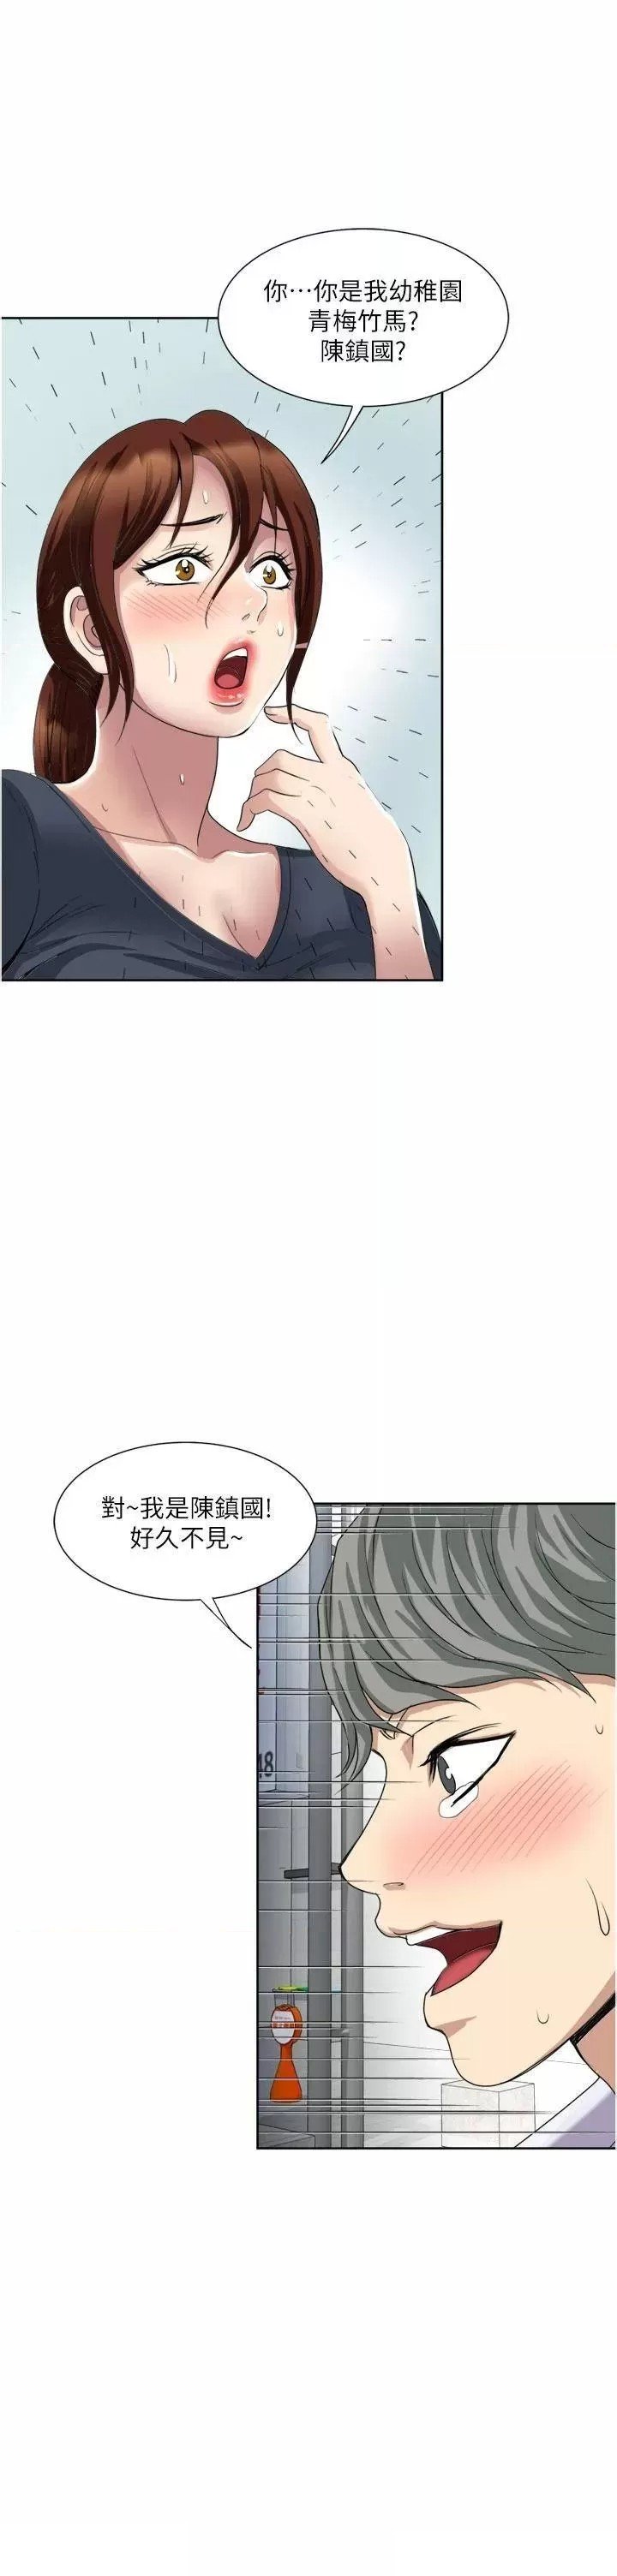 just-once-raw-chap-24-36